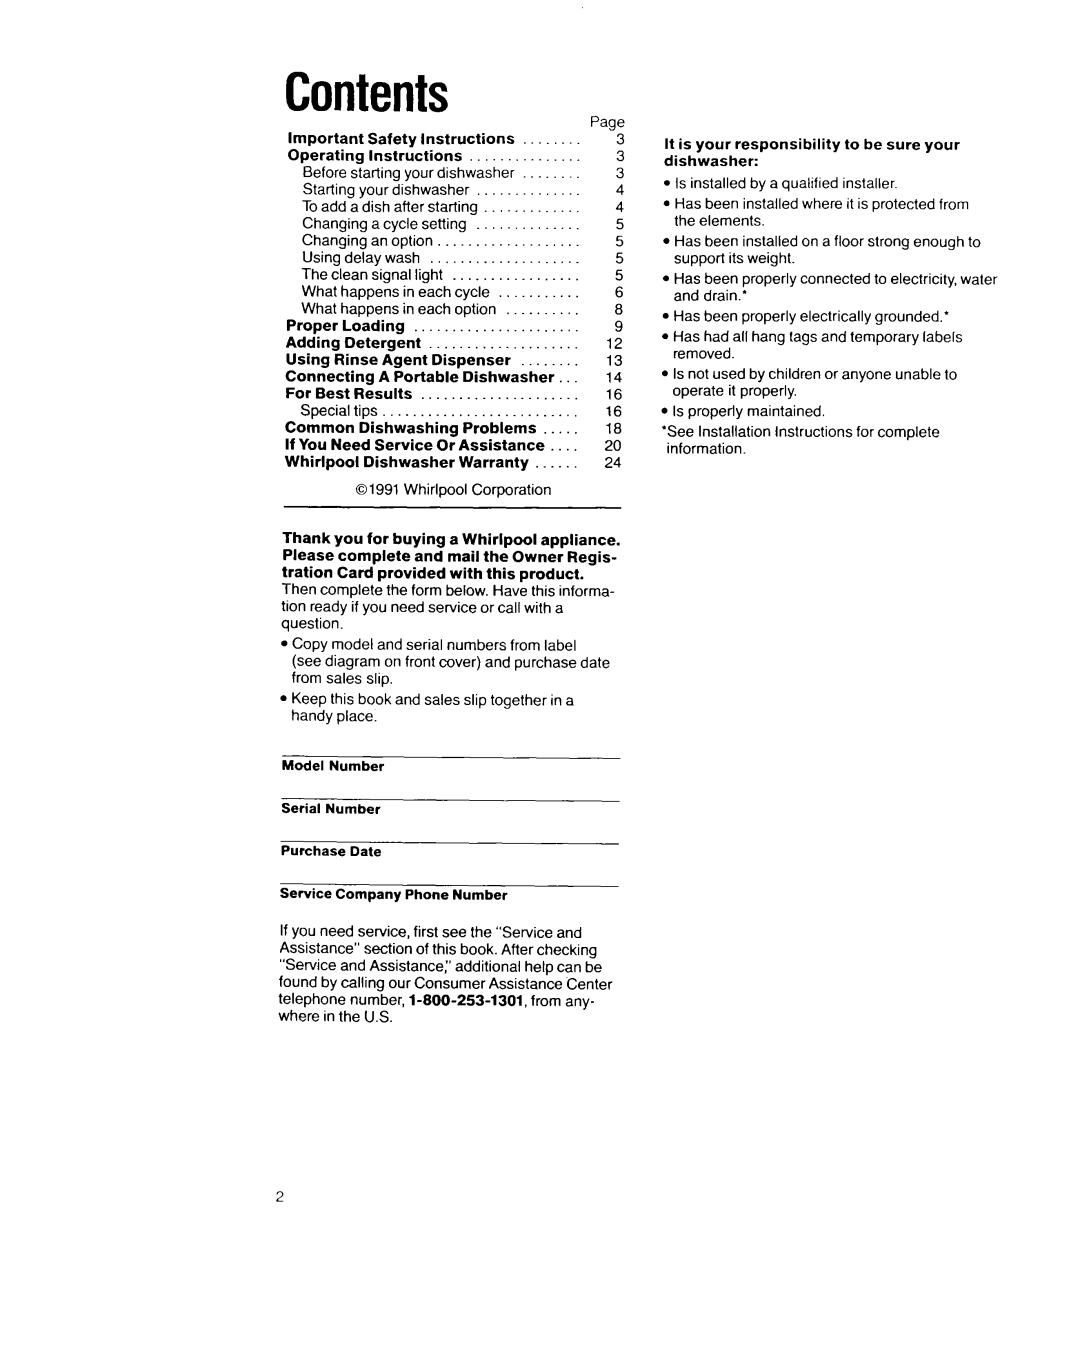 Whirlpool 8700 Series manual Contents 